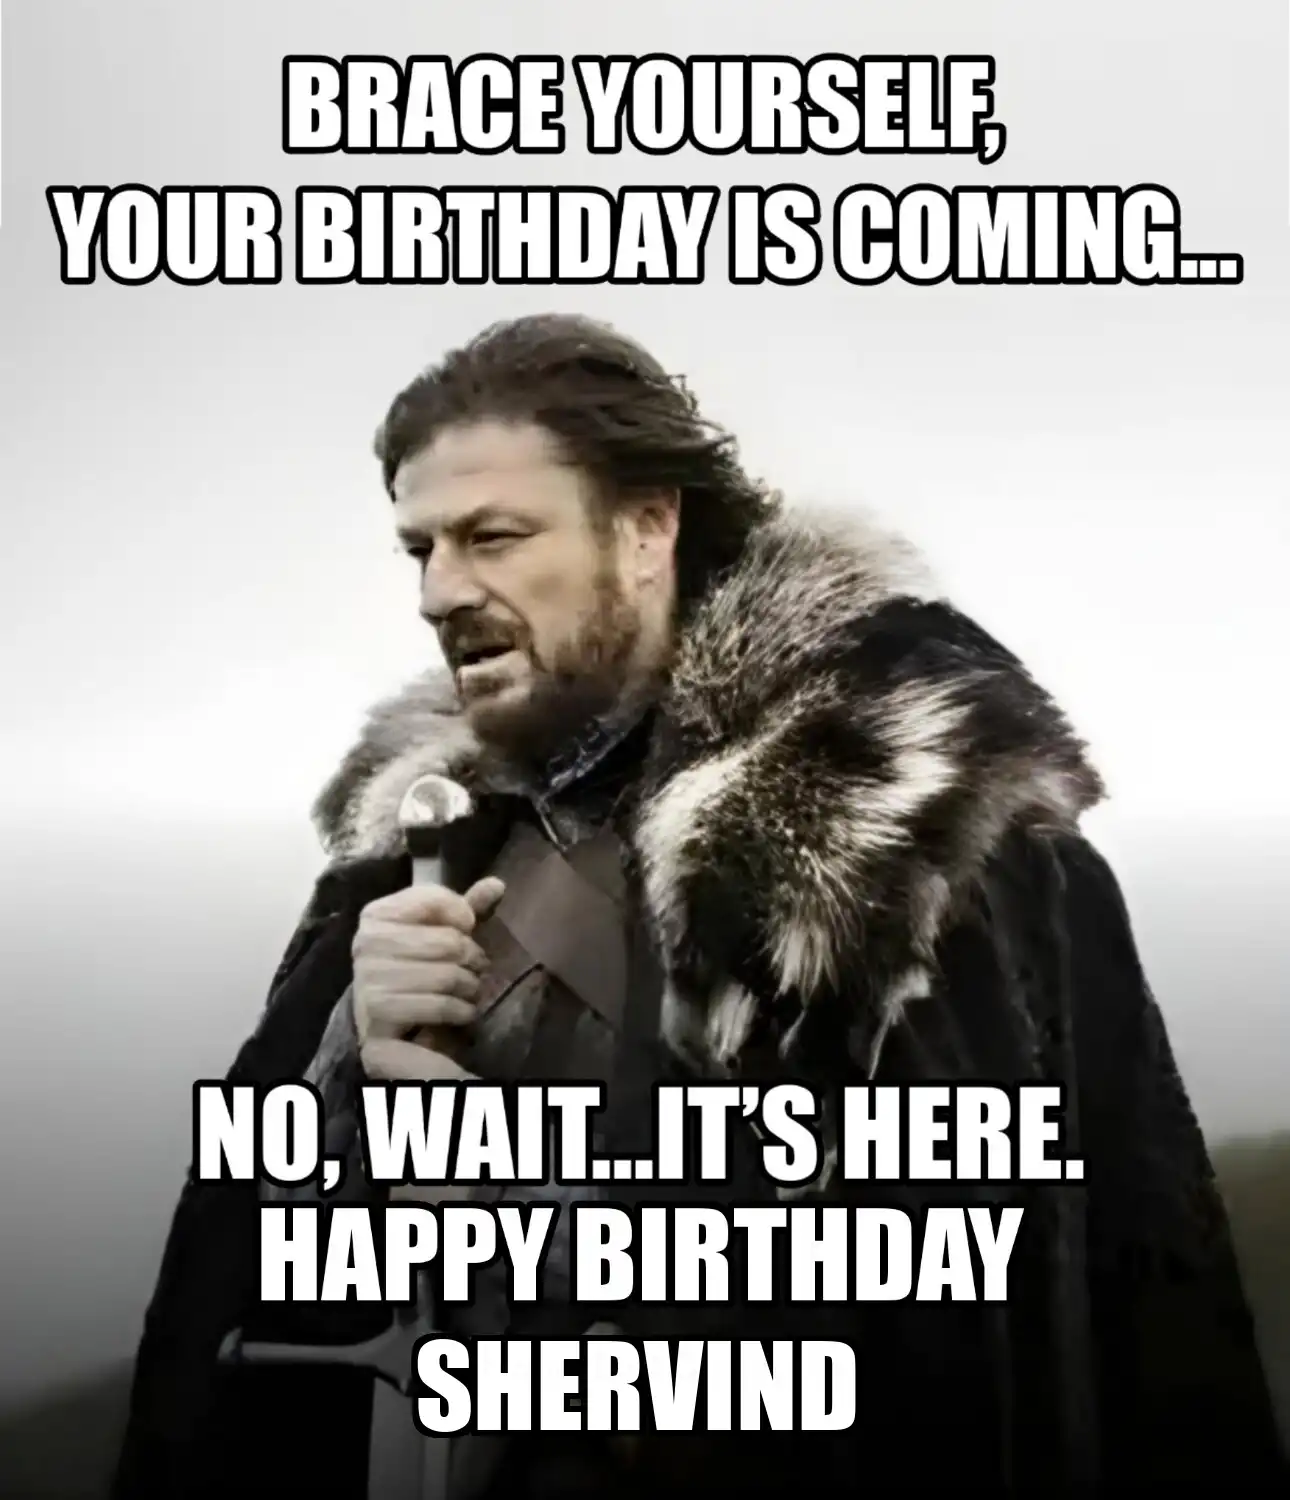 Happy Birthday Shervind Brace Yourself Your Birthday Is Coming Meme